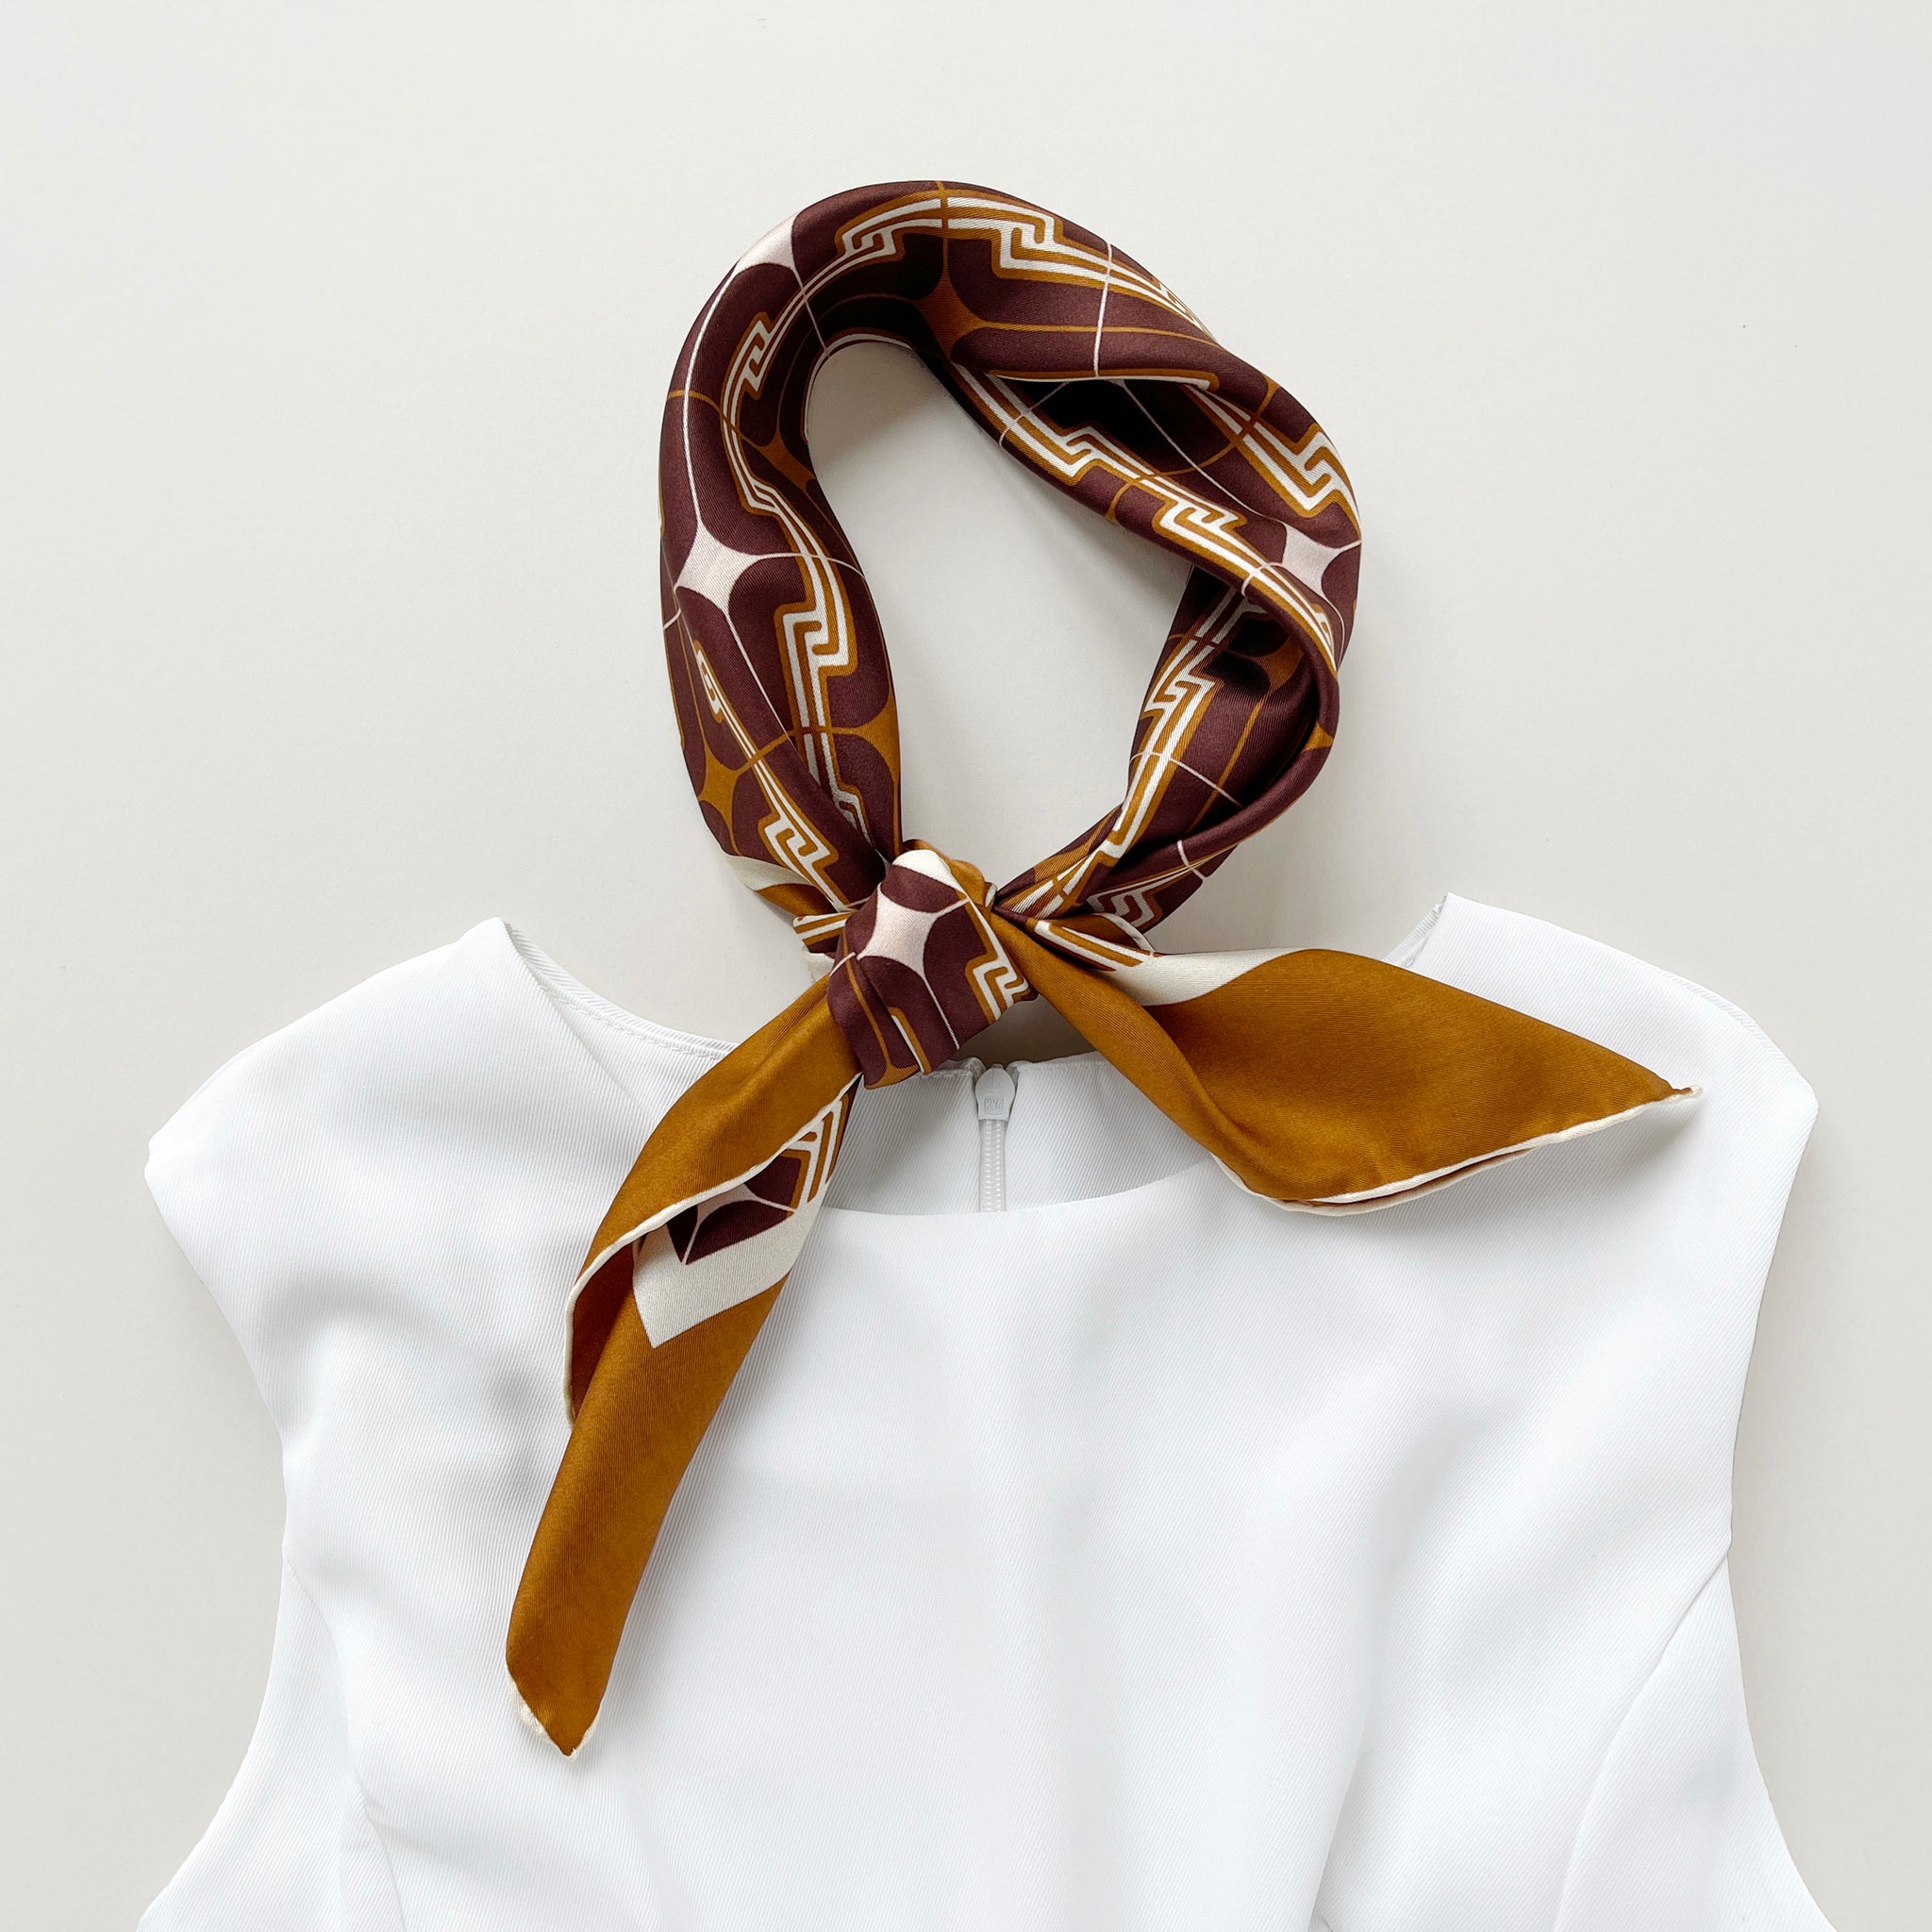 a luxury silk scarf featuring vintage charm 70s style patten in burgundy, tan and beige palette with hand-rolled hems knotted as a neckerchief, paired with a white sleeveless dress